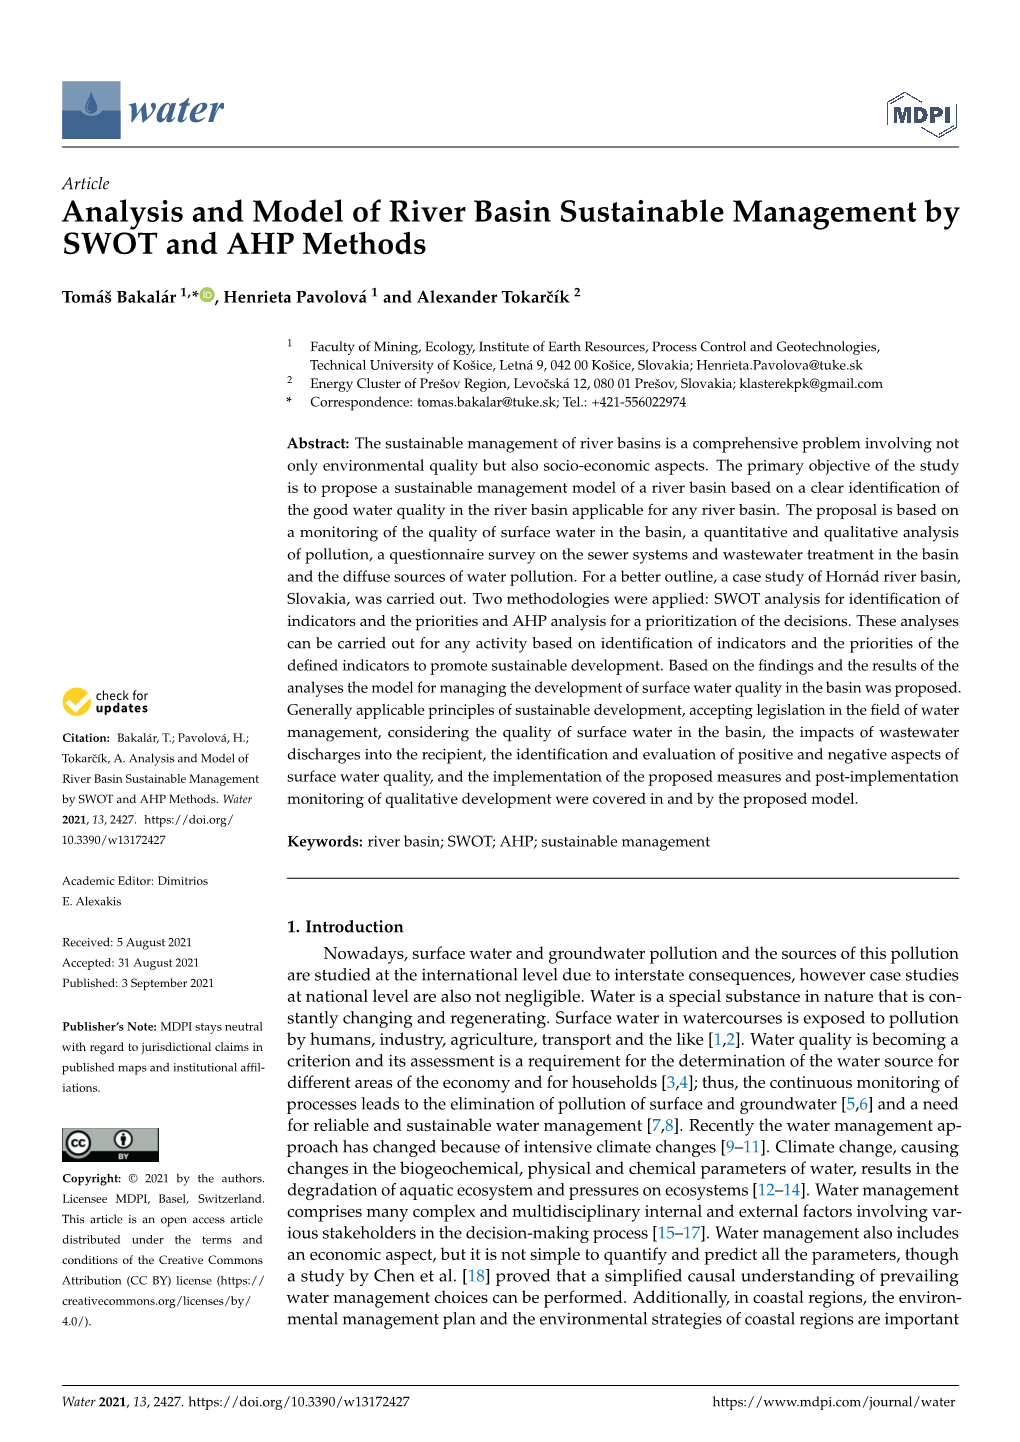 Analysis and Model of River Basin Sustainable Management by SWOT and AHP Methods